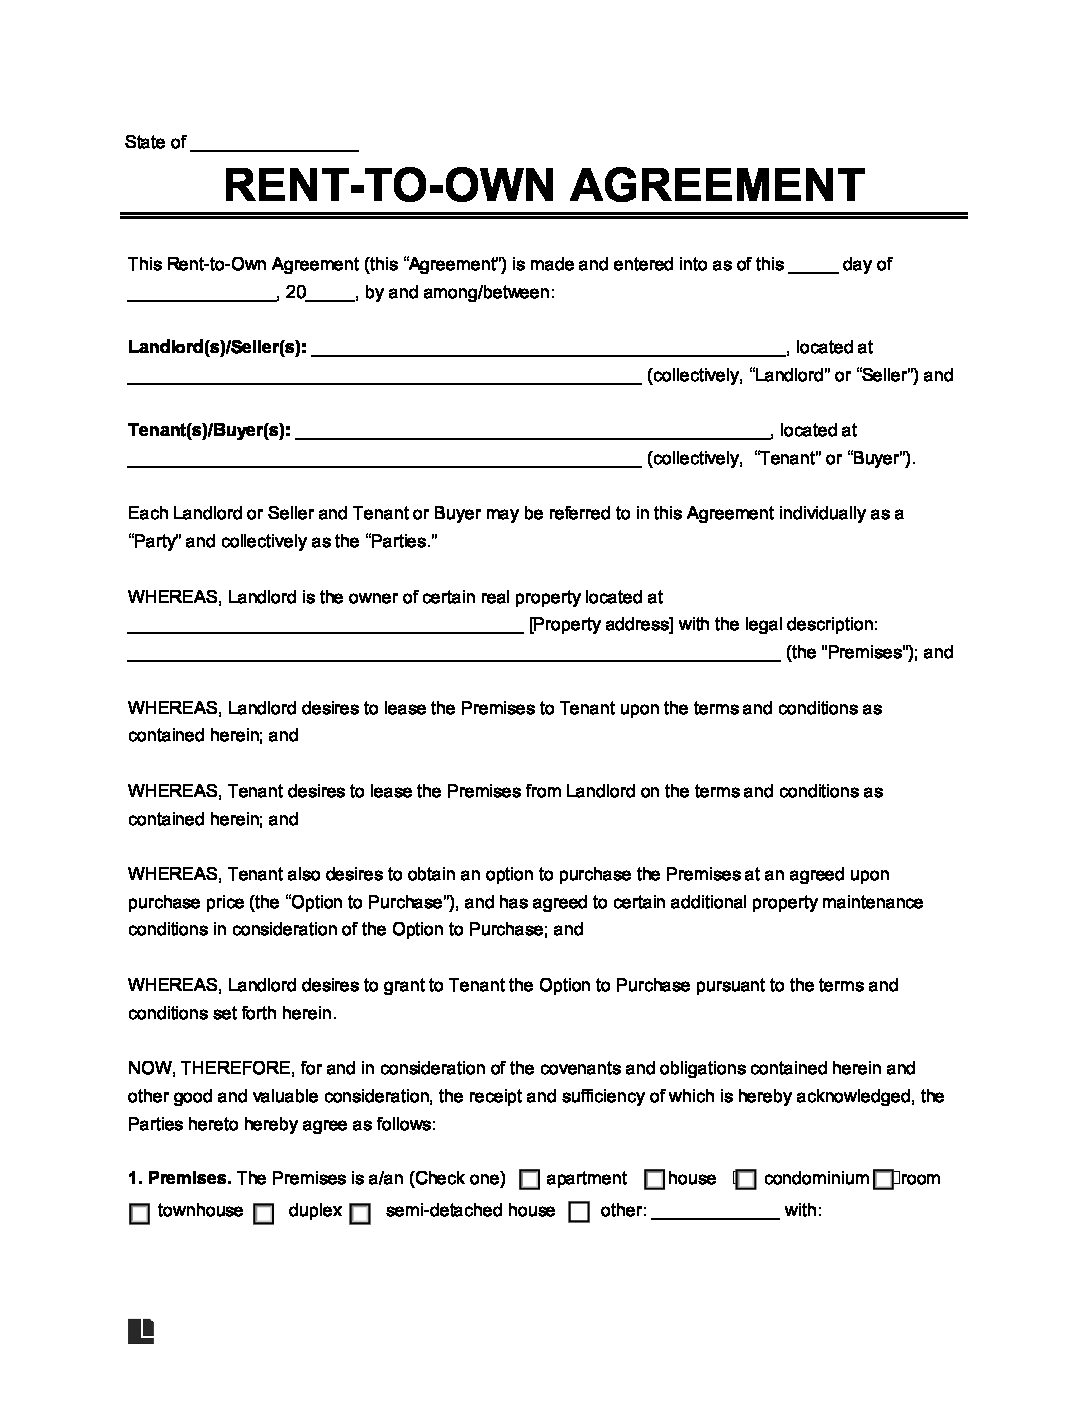 Can You Make Your Own Lease Agreement Printable Form Templates and